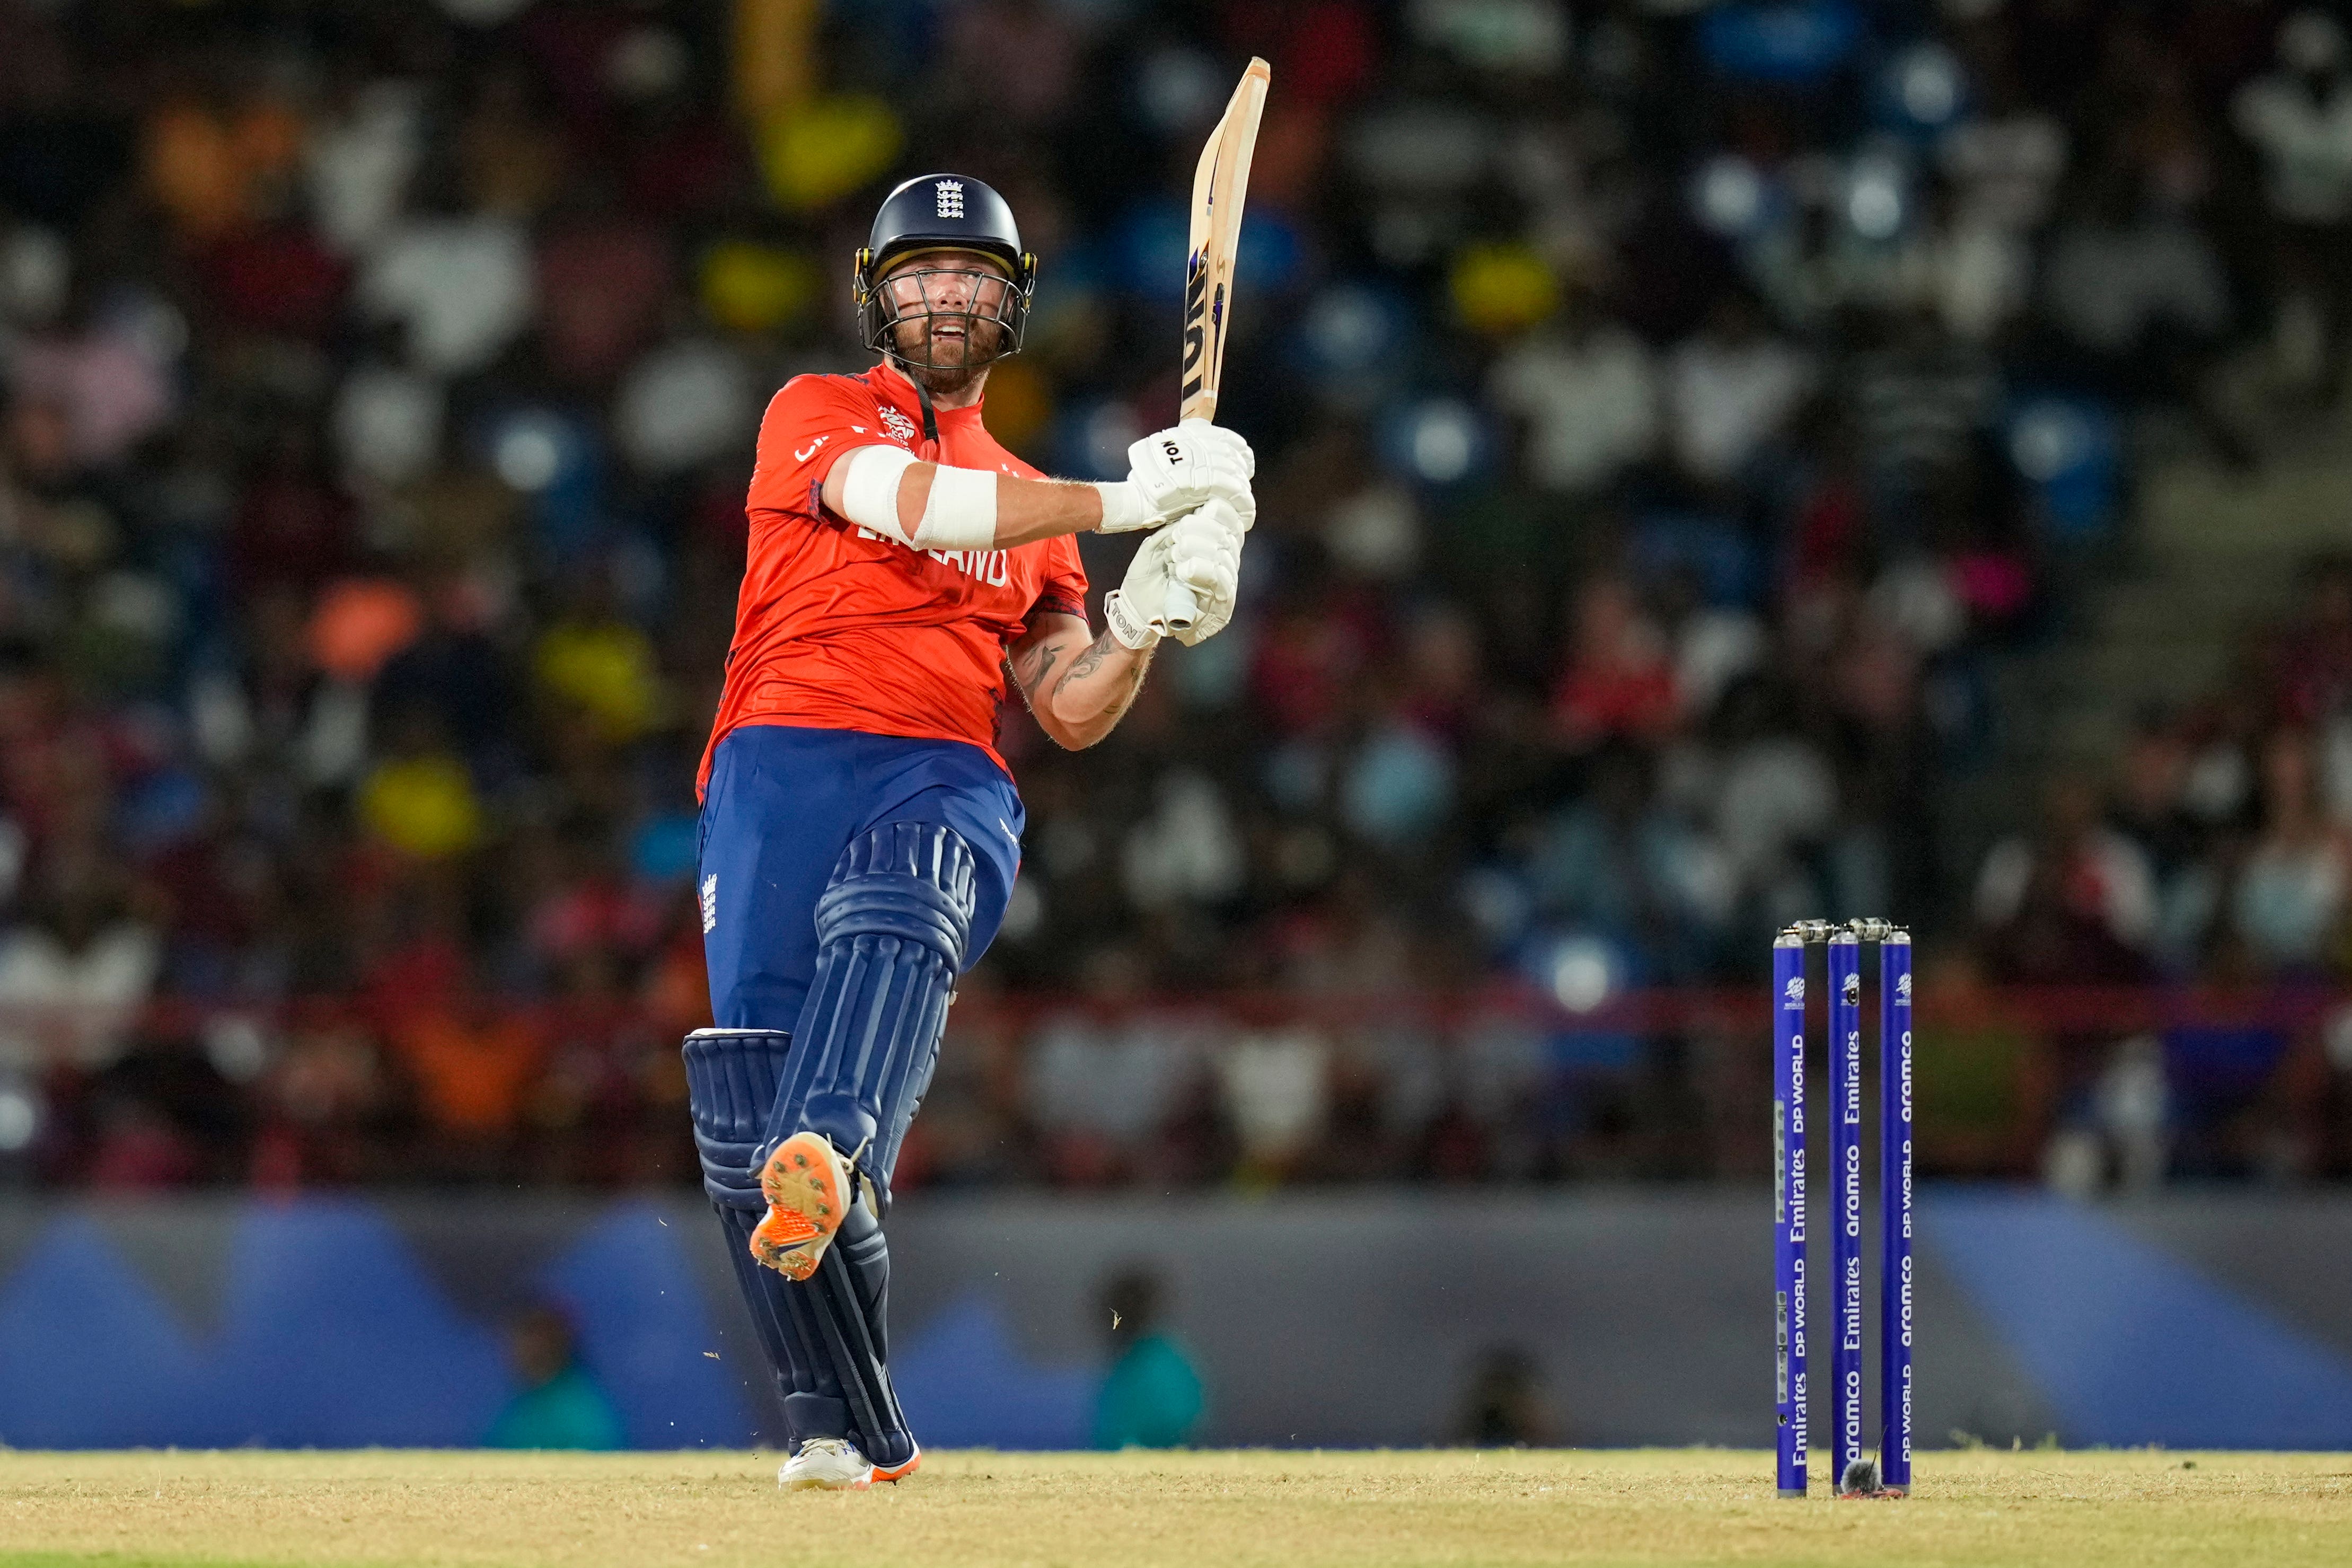 England’s Phil Salt bats during the men’s T20 World Cup cricket match between England and the West Indies (Ramon Espinosa/AP)